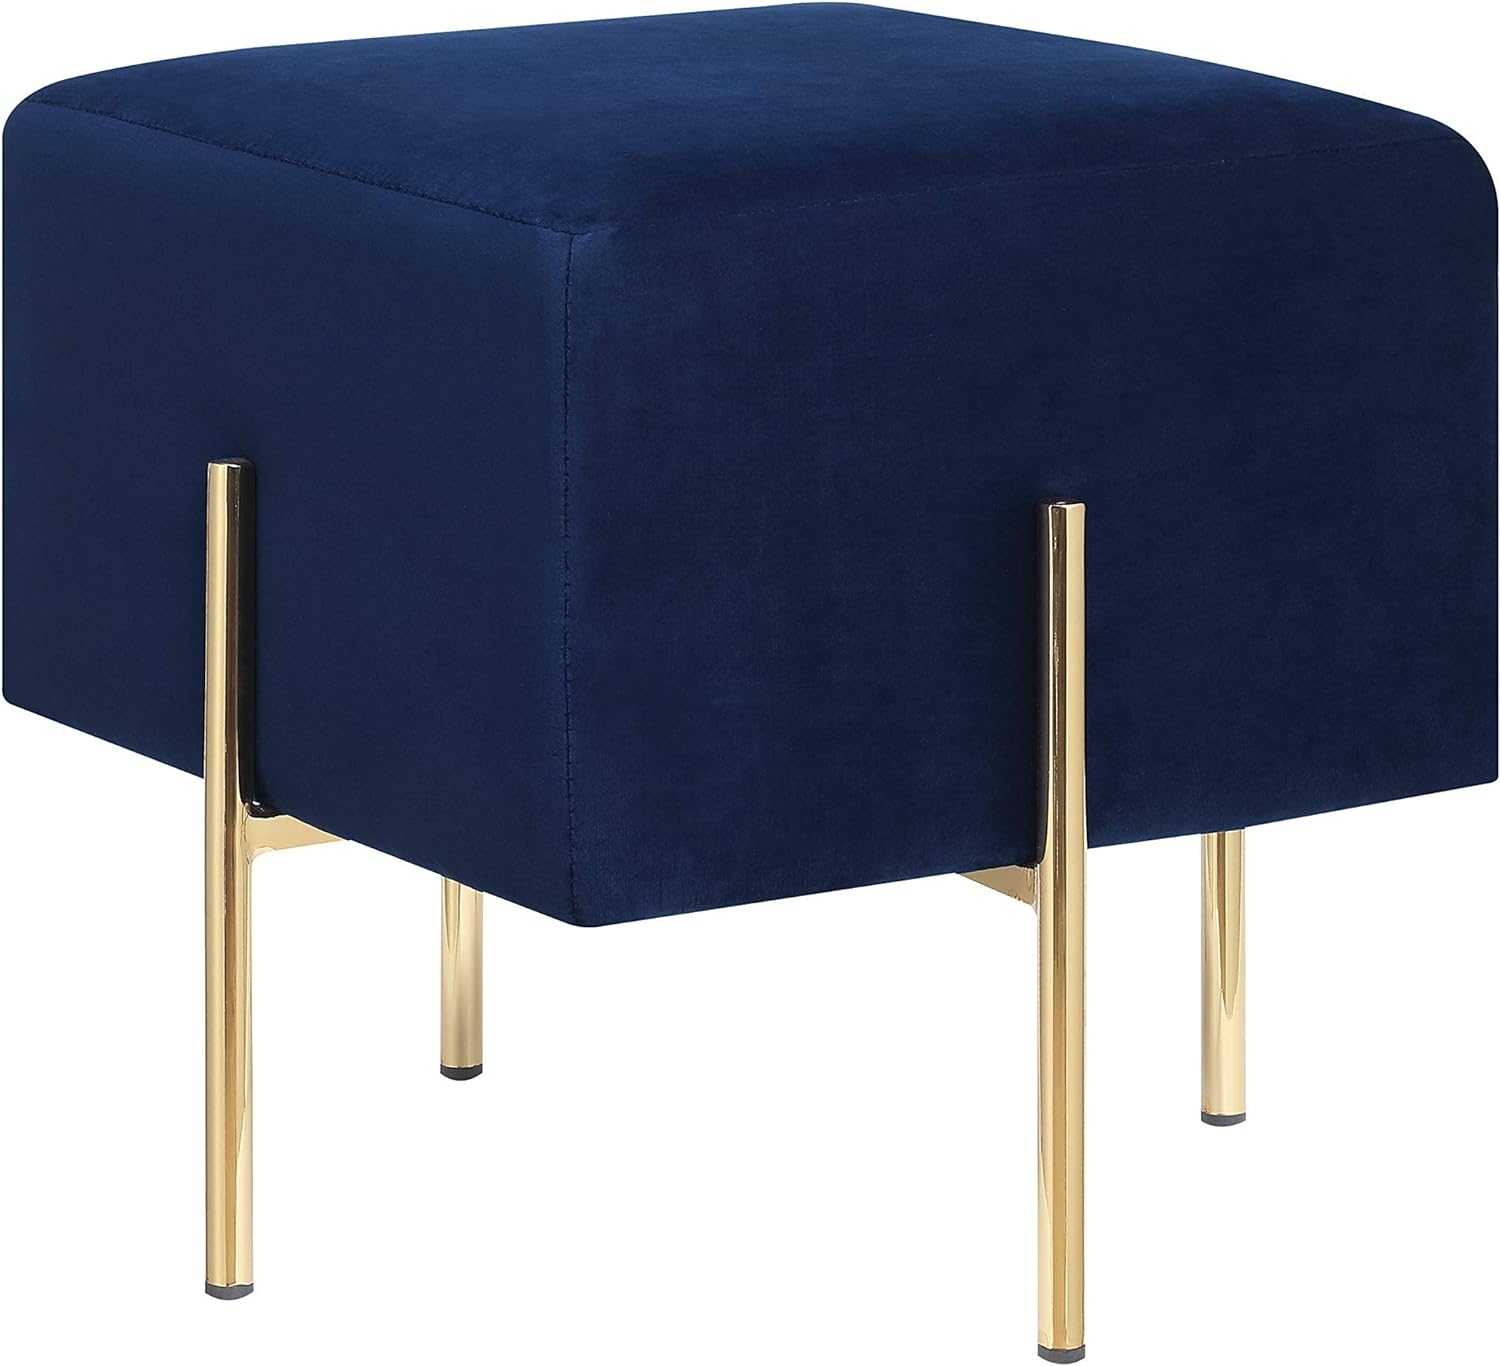 Blue Square Upholstered Ottoman with Gold legs